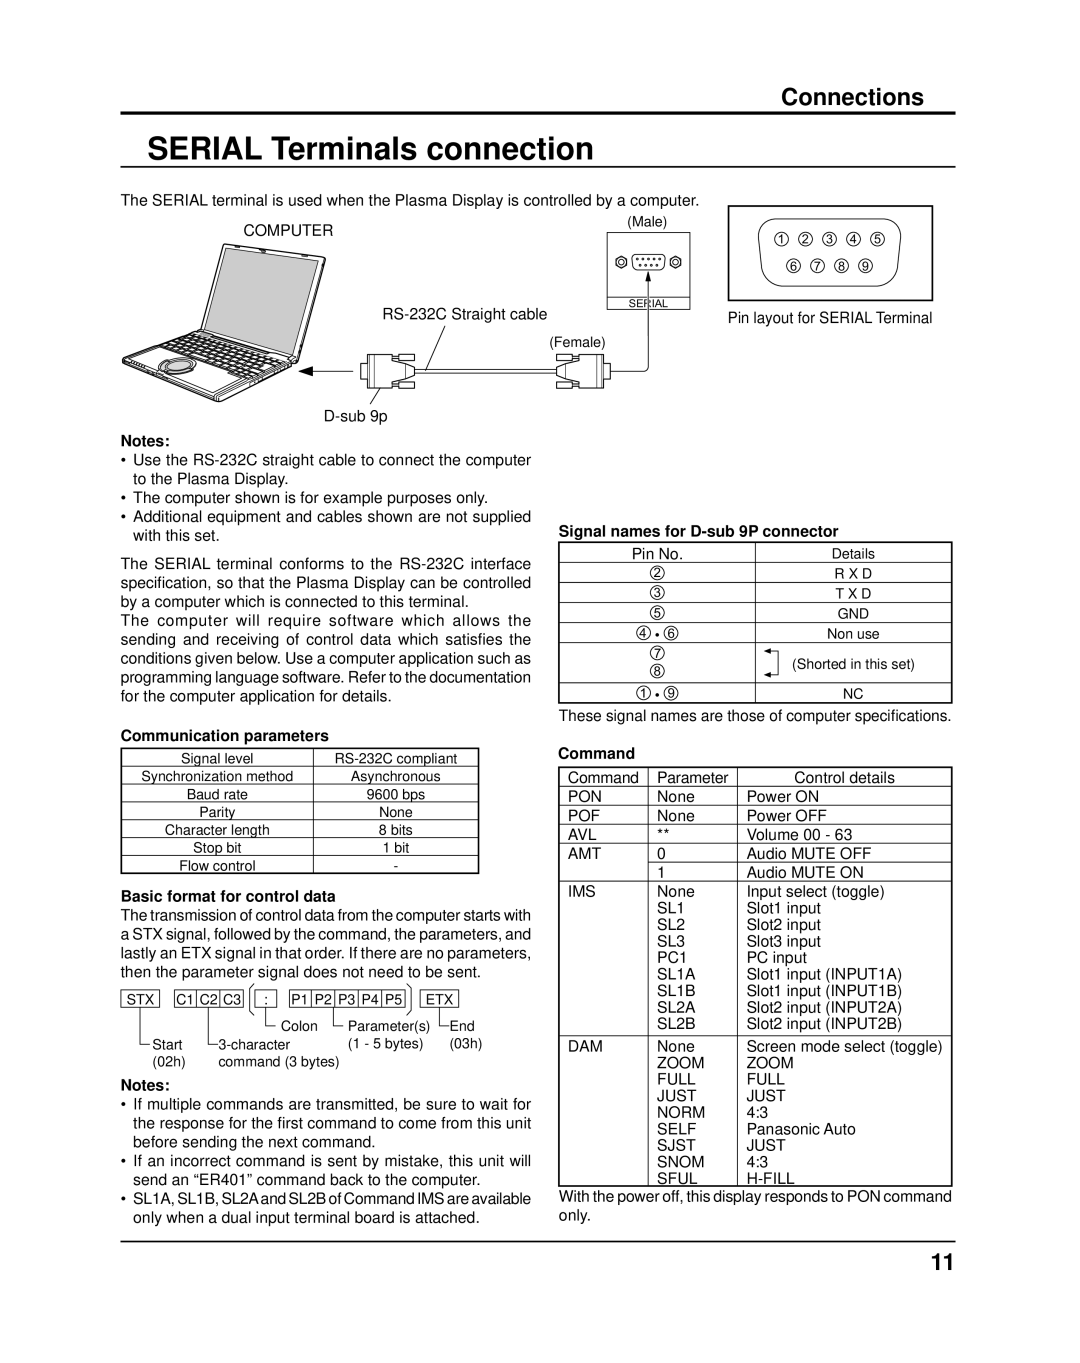 Panasonic TH-42PF11UK, TH-65PF11UK SERIAL Terminals connection, Connections, Signal names for D-sub 9P connector, Command 